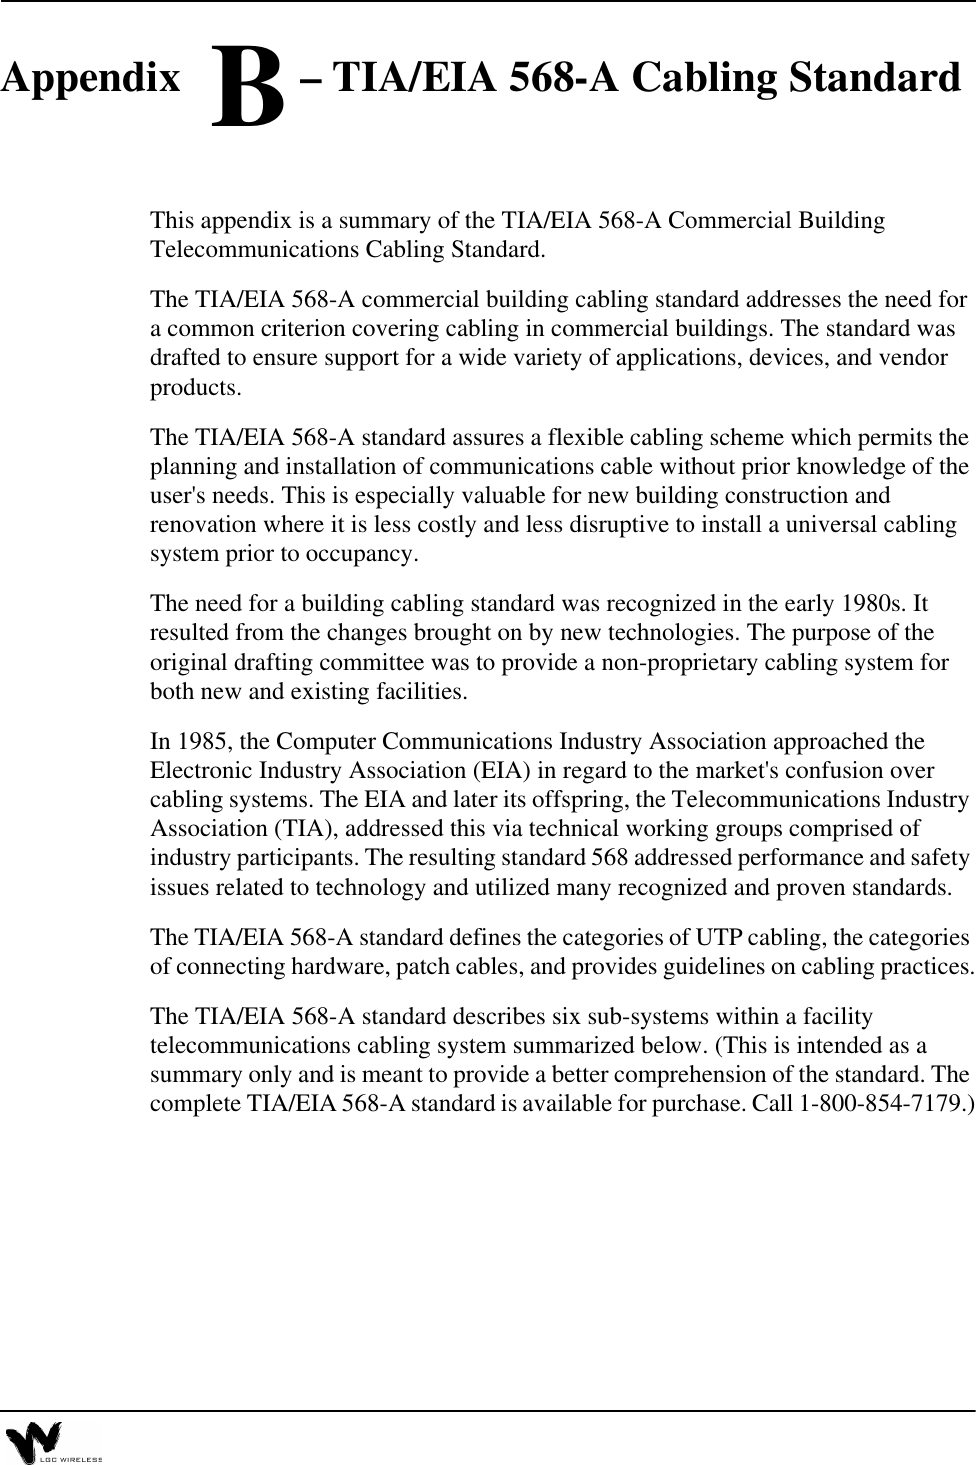 Appendix B – TIA/EIA 568-A Cabling StandardThis appendix is a summary of the TIA/EIA 568-A Commercial Building Telecommunications Cabling Standard.The TIA/EIA 568-A commercial building cabling standard addresses the need for a common criterion covering cabling in commercial buildings. The standard was drafted to ensure support for a wide variety of applications, devices, and vendor products.The TIA/EIA 568-A standard assures a flexible cabling scheme which permits the planning and installation of communications cable without prior knowledge of the user&apos;s needs. This is especially valuable for new building construction and renovation where it is less costly and less disruptive to install a universal cabling system prior to occupancy.The need for a building cabling standard was recognized in the early 1980s. It resulted from the changes brought on by new technologies. The purpose of the original drafting committee was to provide a non-proprietary cabling system for both new and existing facilities.In 1985, the Computer Communications Industry Association approached the Electronic Industry Association (EIA) in regard to the market&apos;s confusion over cabling systems. The EIA and later its offspring, the Telecommunications Industry Association (TIA), addressed this via technical working groups comprised of industry participants. The resulting standard 568 addressed performance and safety issues related to technology and utilized many recognized and proven standards.The TIA/EIA 568-A standard defines the categories of UTP cabling, the categories of connecting hardware, patch cables, and provides guidelines on cabling practices.The TIA/EIA 568-A standard describes six sub-systems within a facility telecommunications cabling system summarized below. (This is intended as a summary only and is meant to provide a better comprehension of the standard. The complete TIA/EIA 568-A standard is available for purchase. Call 1-800-854-7179.)